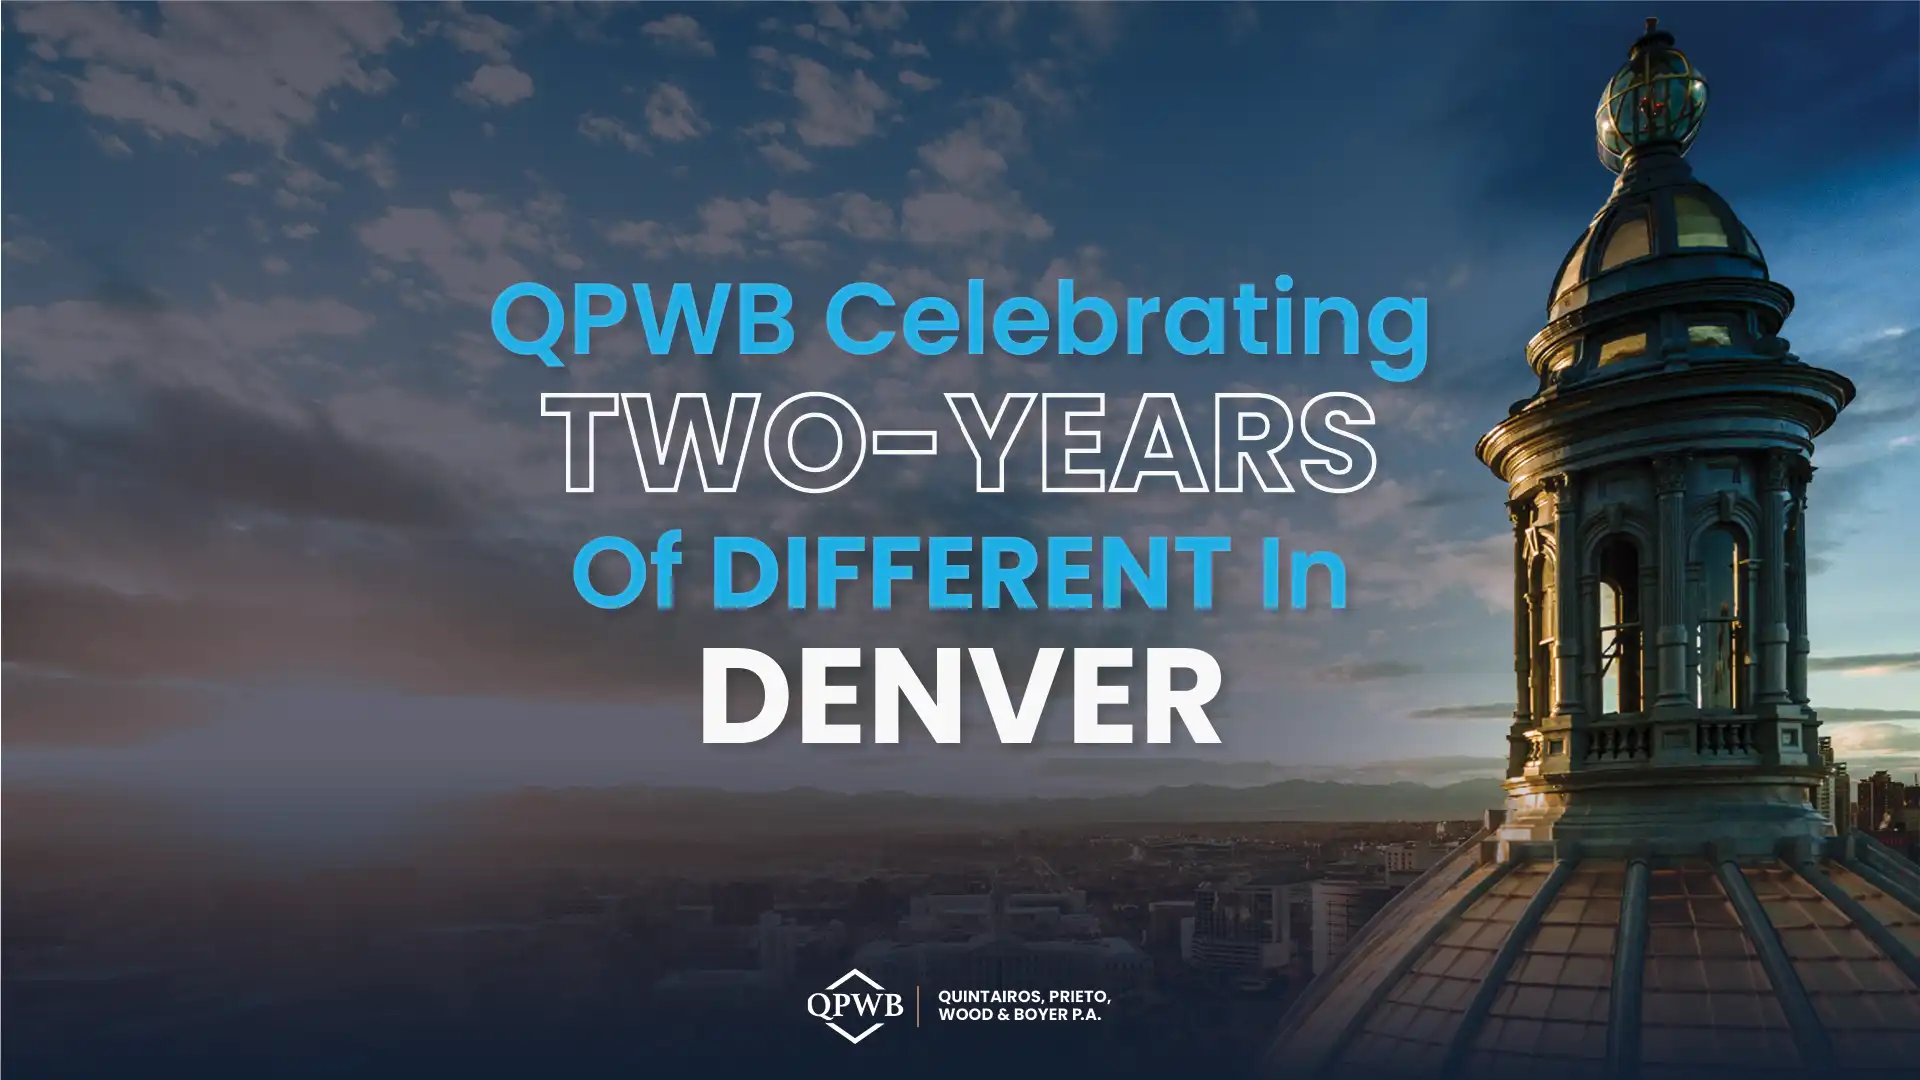 QPWB Celebrates Two-Years of Different in Denver